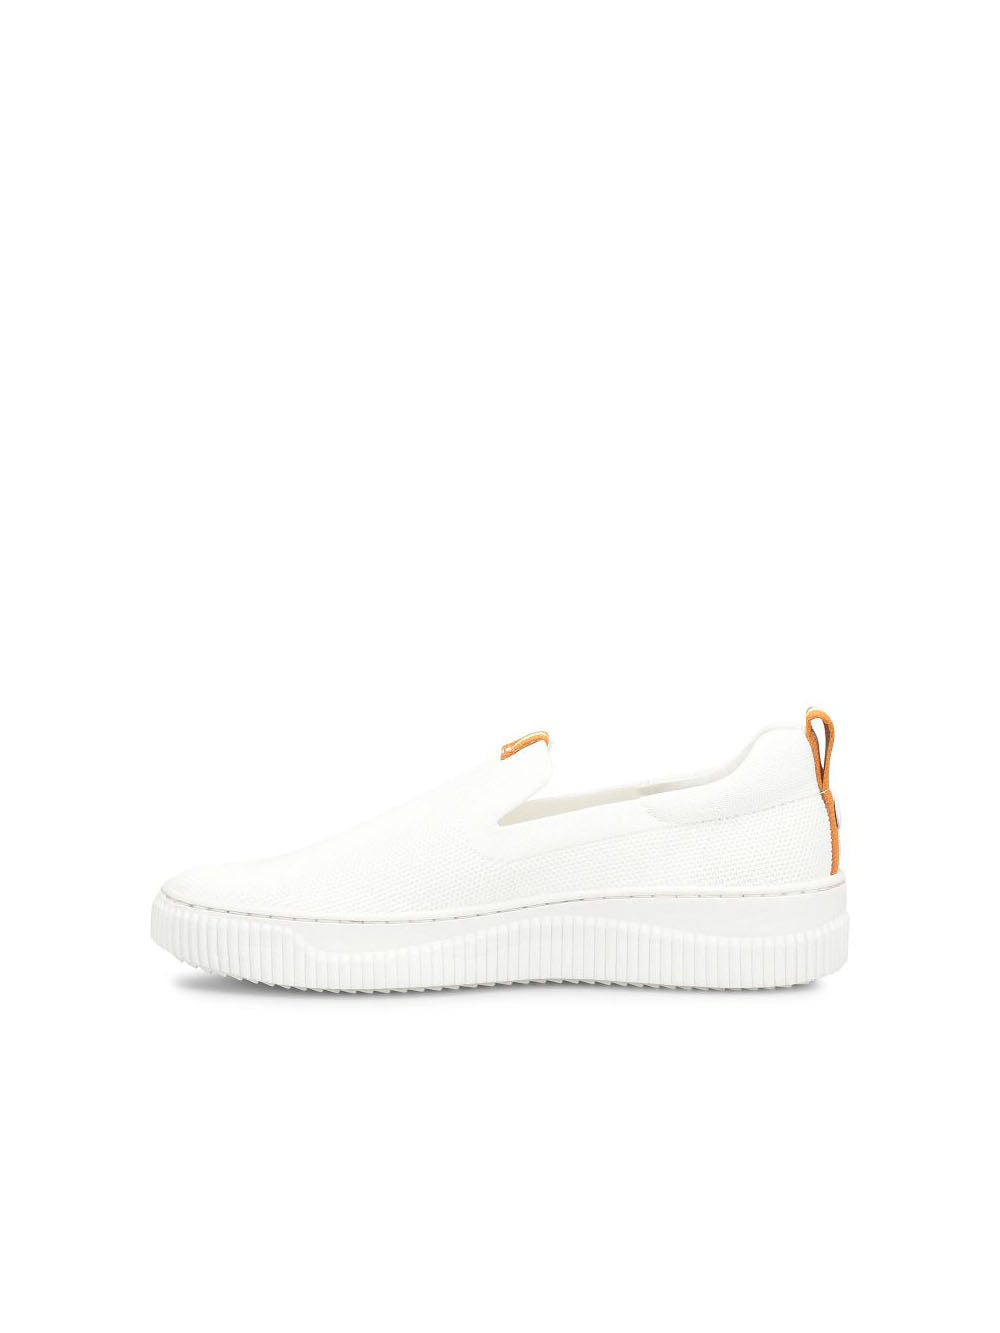 sofft shoes frayda mesh slip on sneakers in white with orange detail